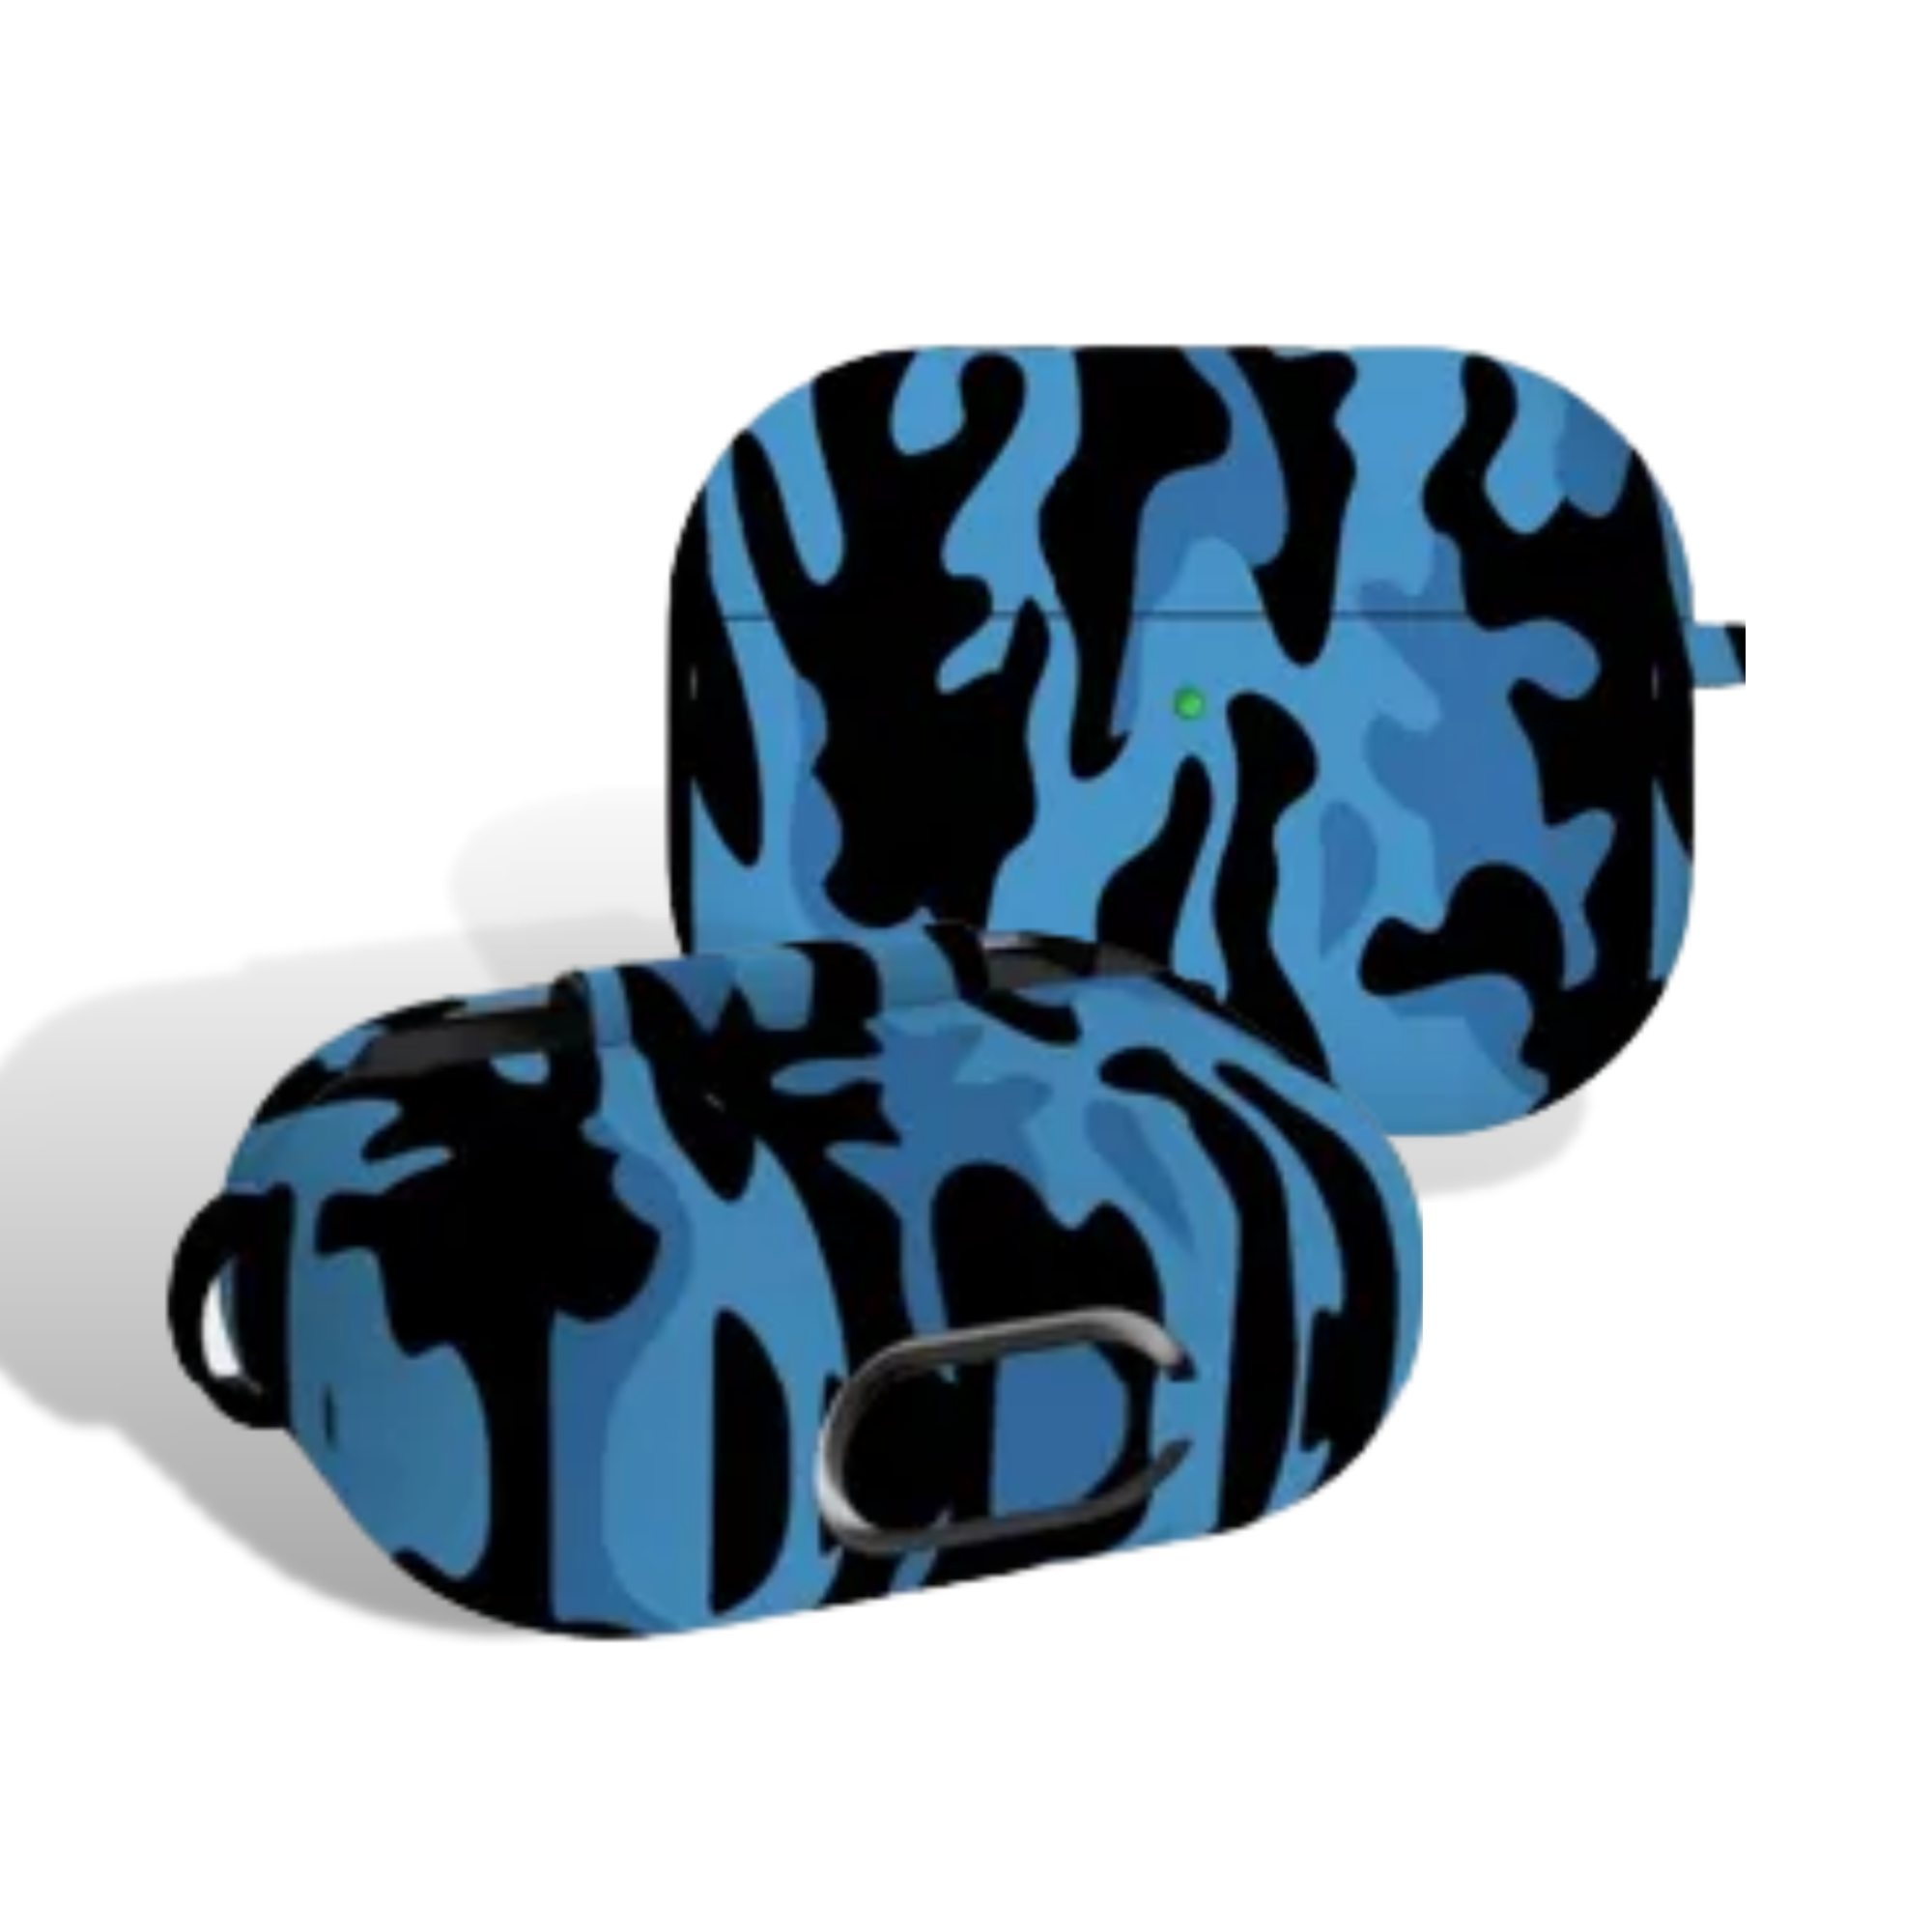 Apple Airpod Pro Case - Camouflage Army Fatigue Design Protective Shockproof Silicone Cover With Clip Keychain Carabiner - Supports Wireless Qi Charging for Airpods Pro Generation 1 - Airforce Blue